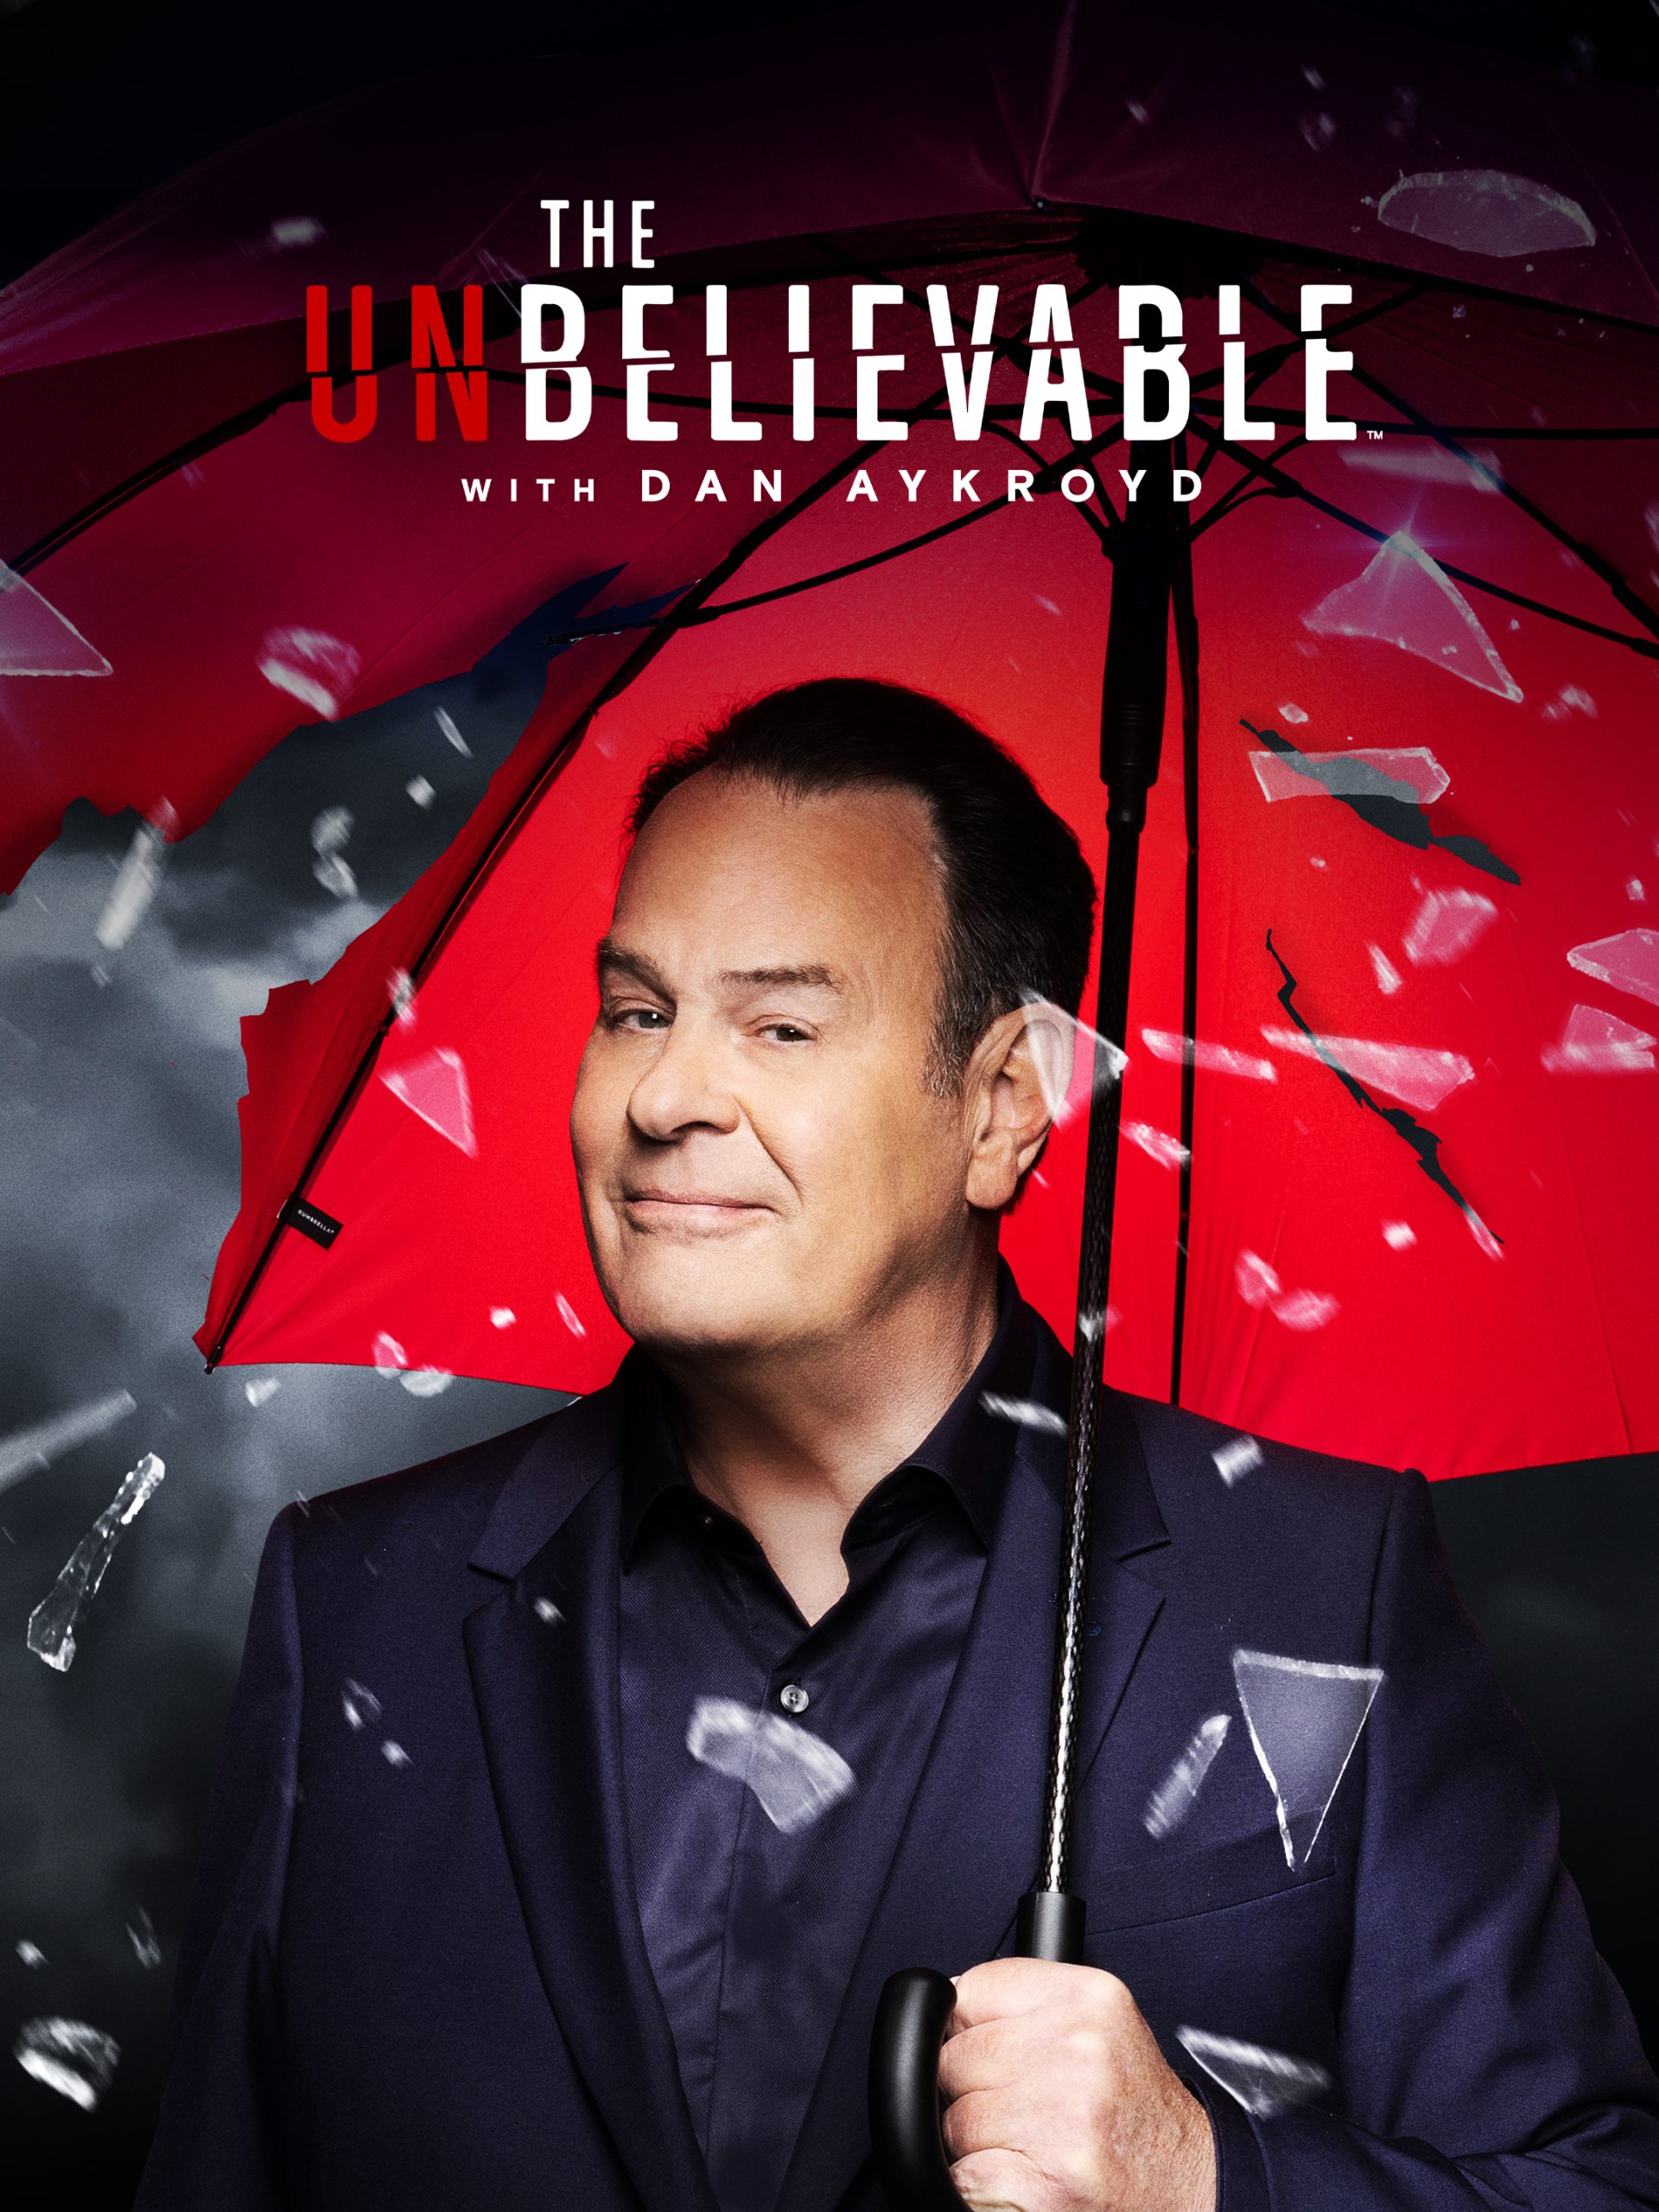 The UnBelievable With Dan Aykroyd "Strange Experiments" S1E8 January 19